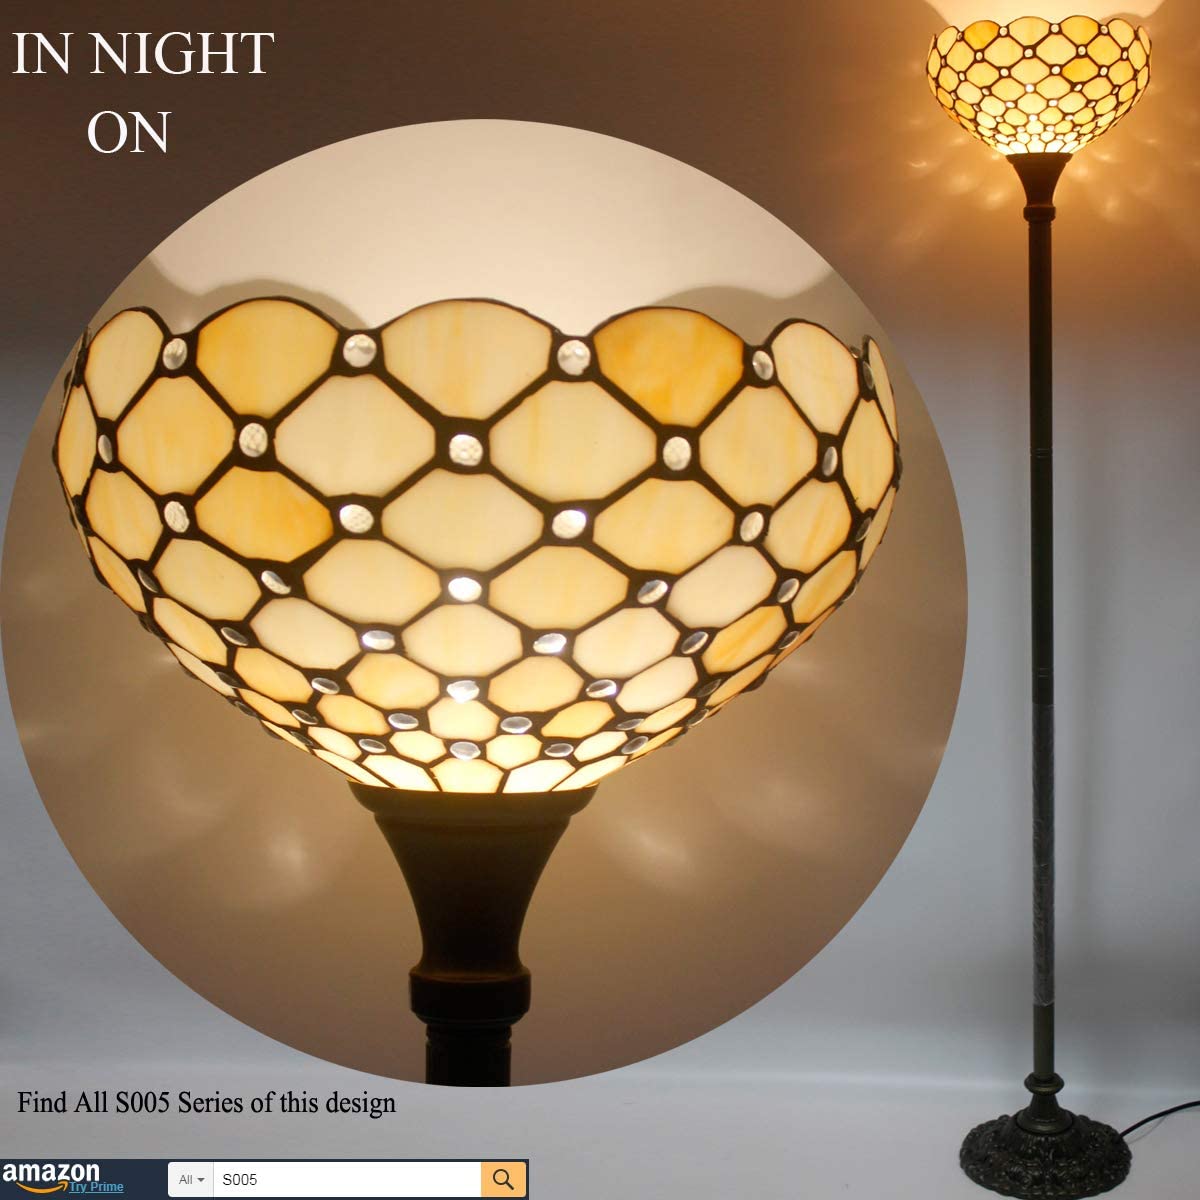 BBNBDMZ  Floor Lamp Cream Amber Stained Glass Bead Light 12X12X66 Inches Pole Torchiere Standing Corner Torch Uplight Decor Bedroom Living Room  Office (LED Bulb Included) S005 Ser